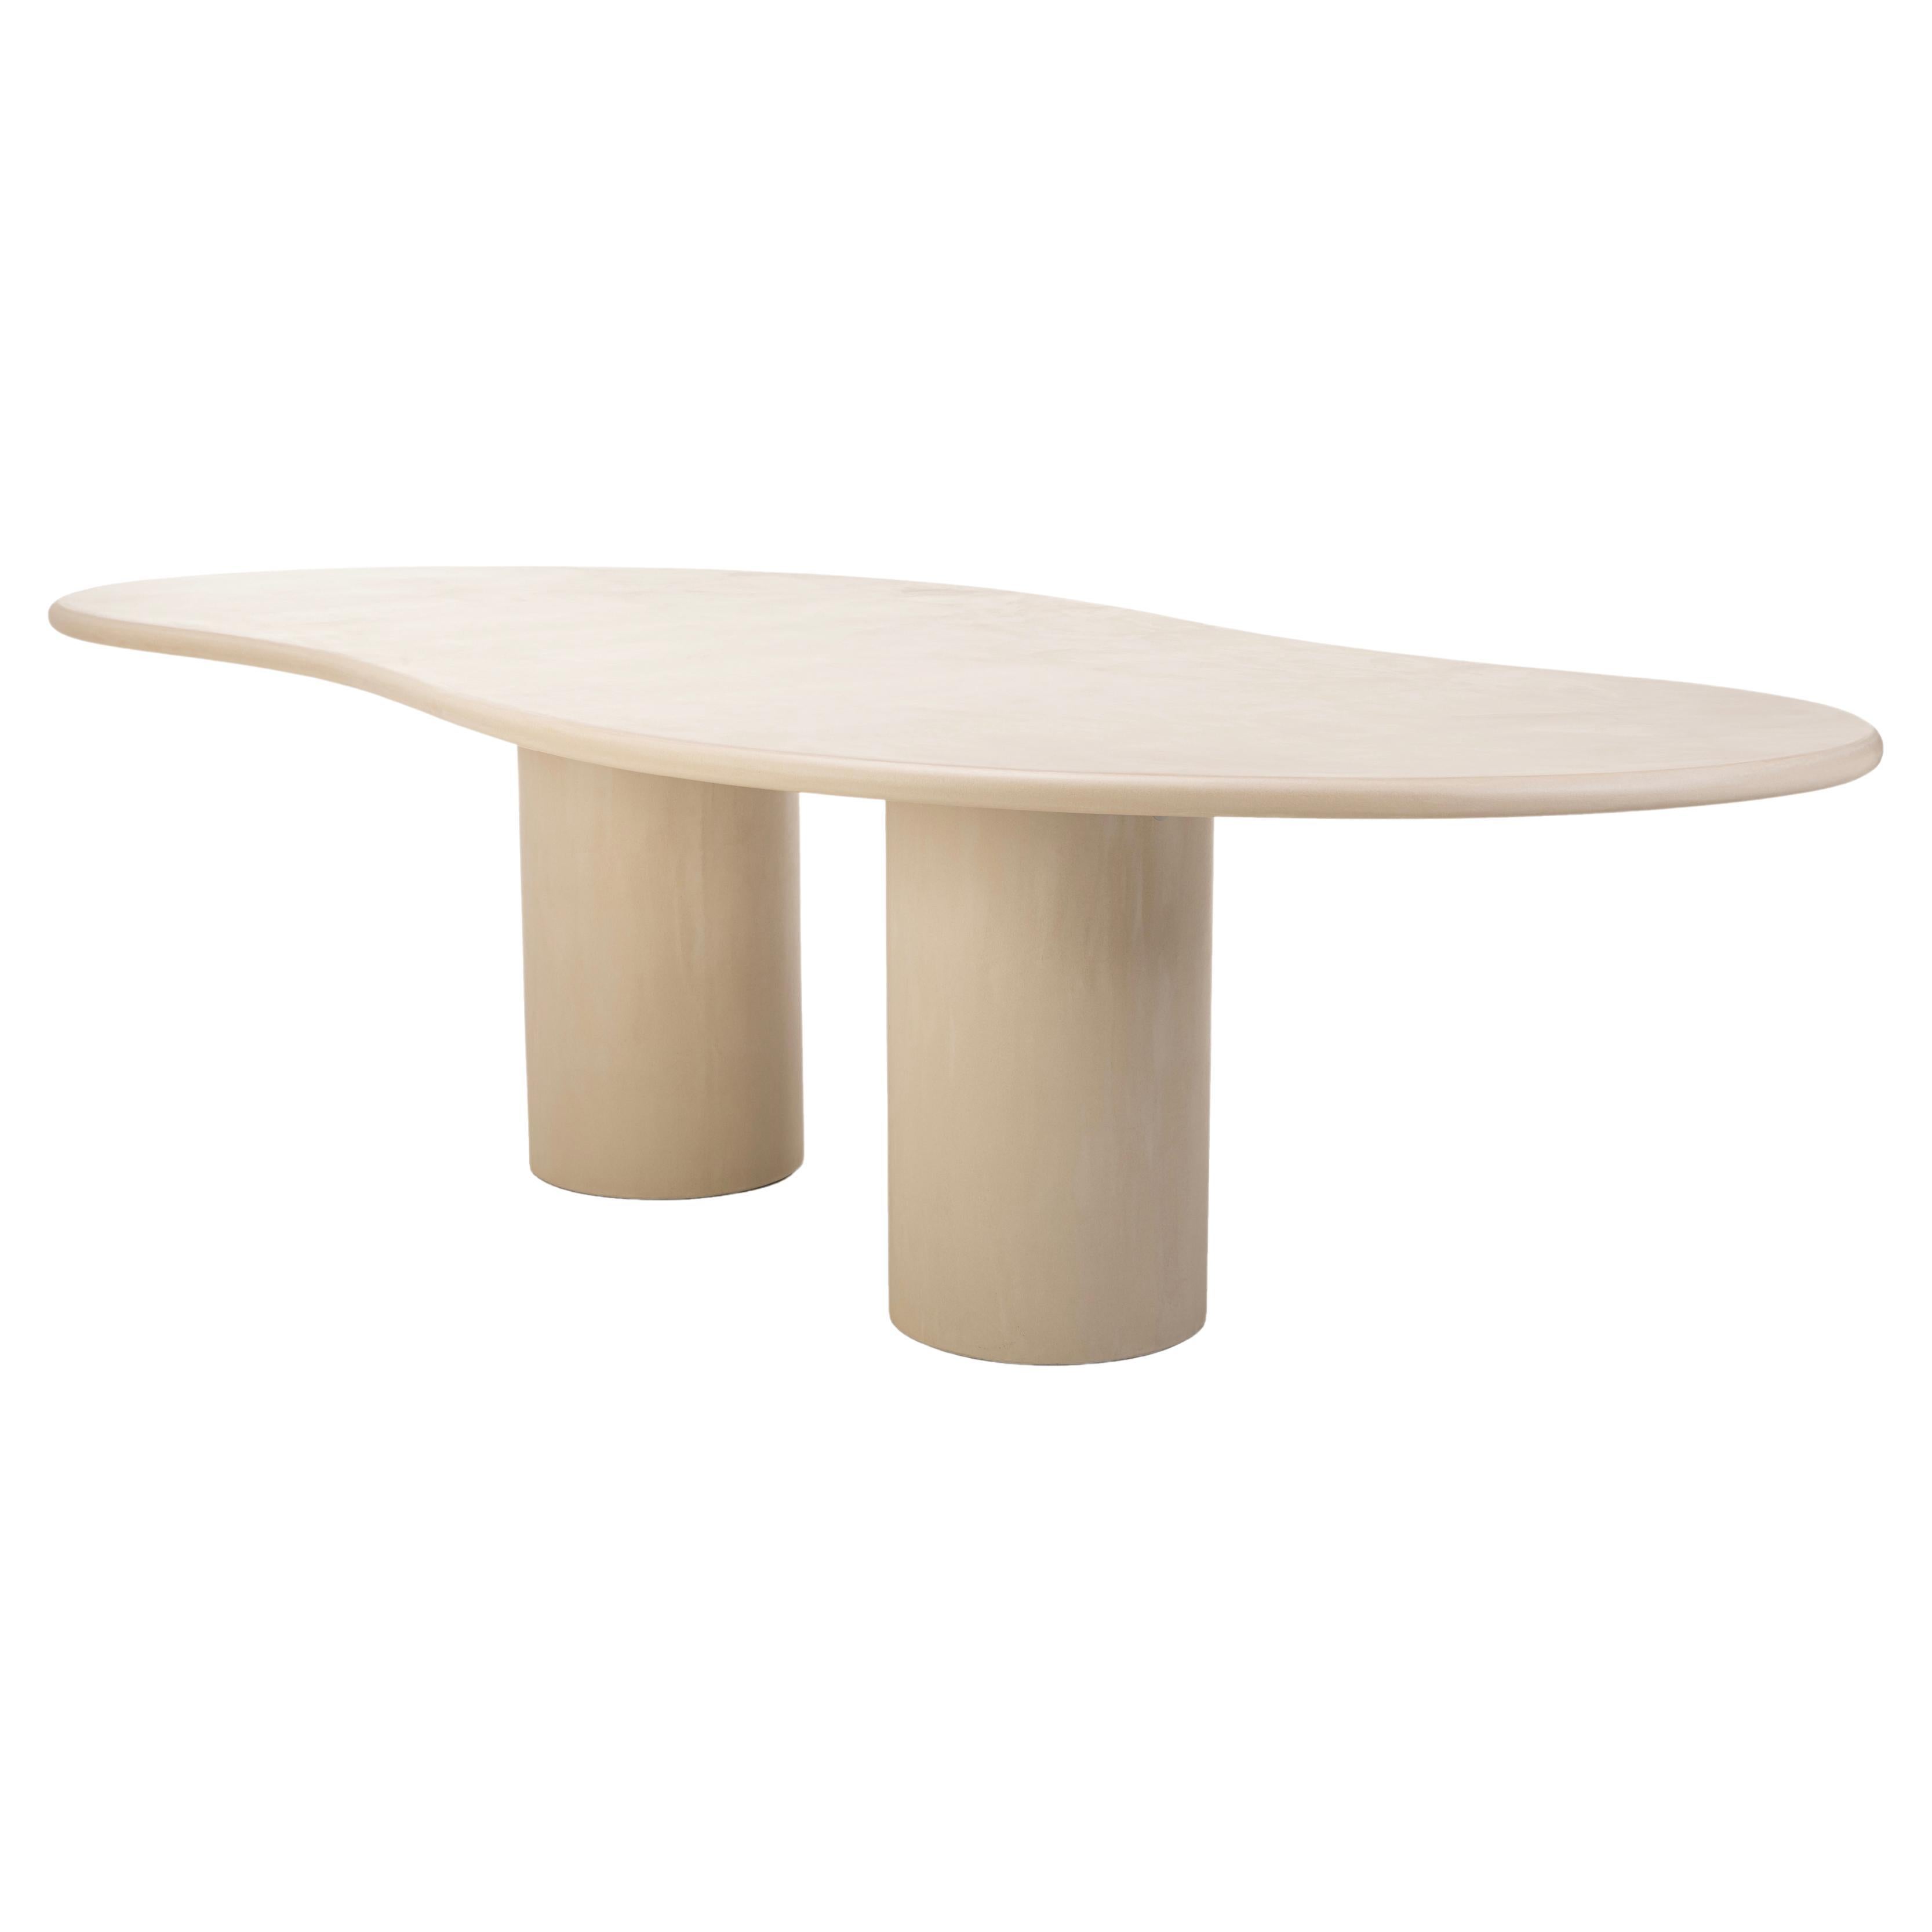 Natural Plaster Dining Table "Latus" 300 by Isabelle Beaumont For Sale